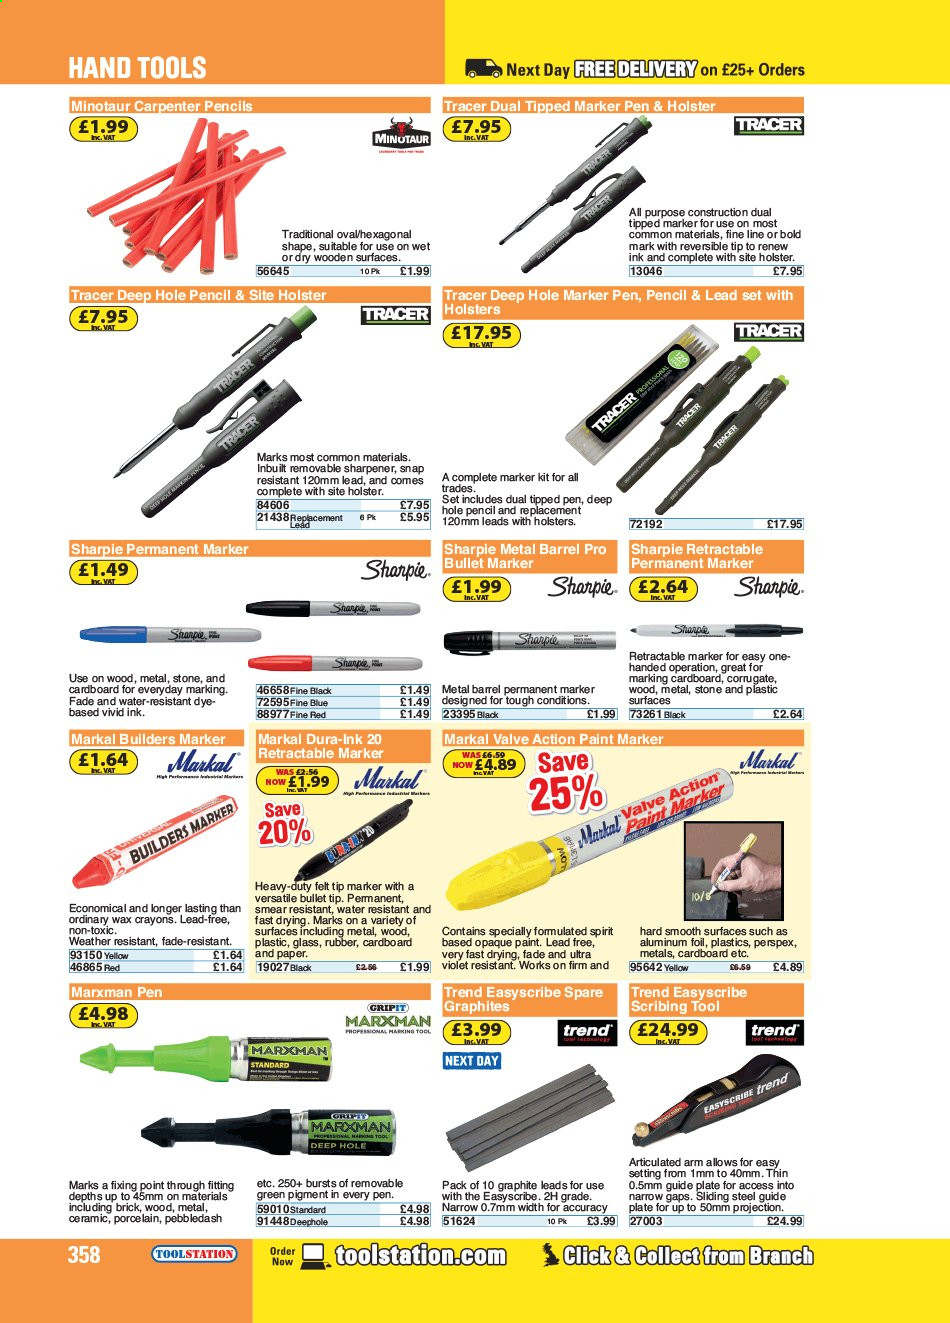 Toolstation offer . Page 358.